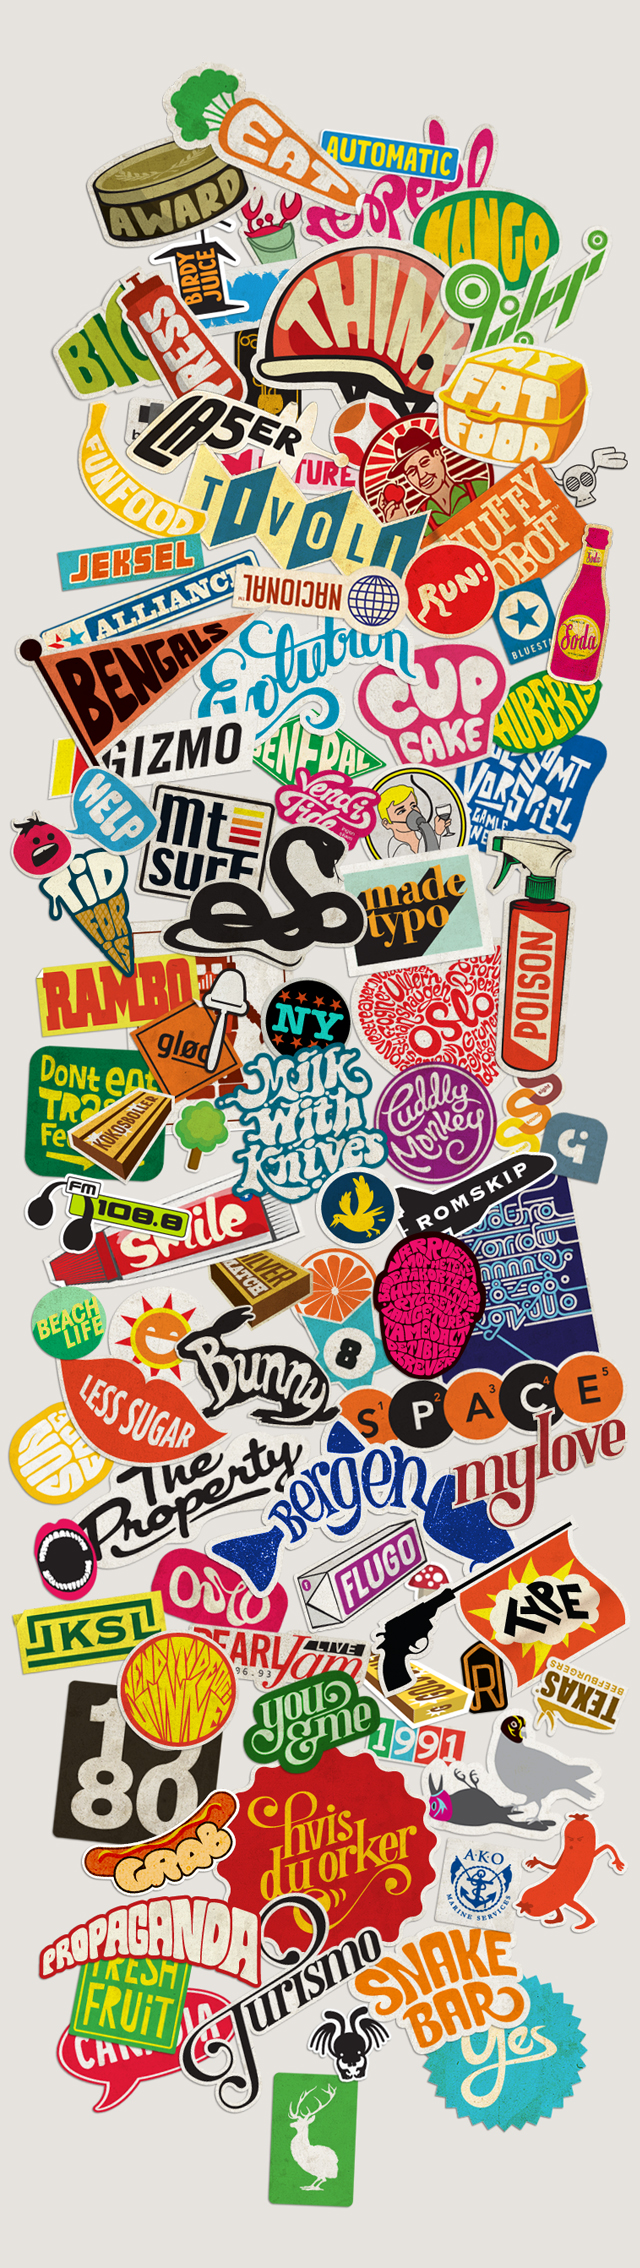 I also LOVE stickers! Great inspiration!